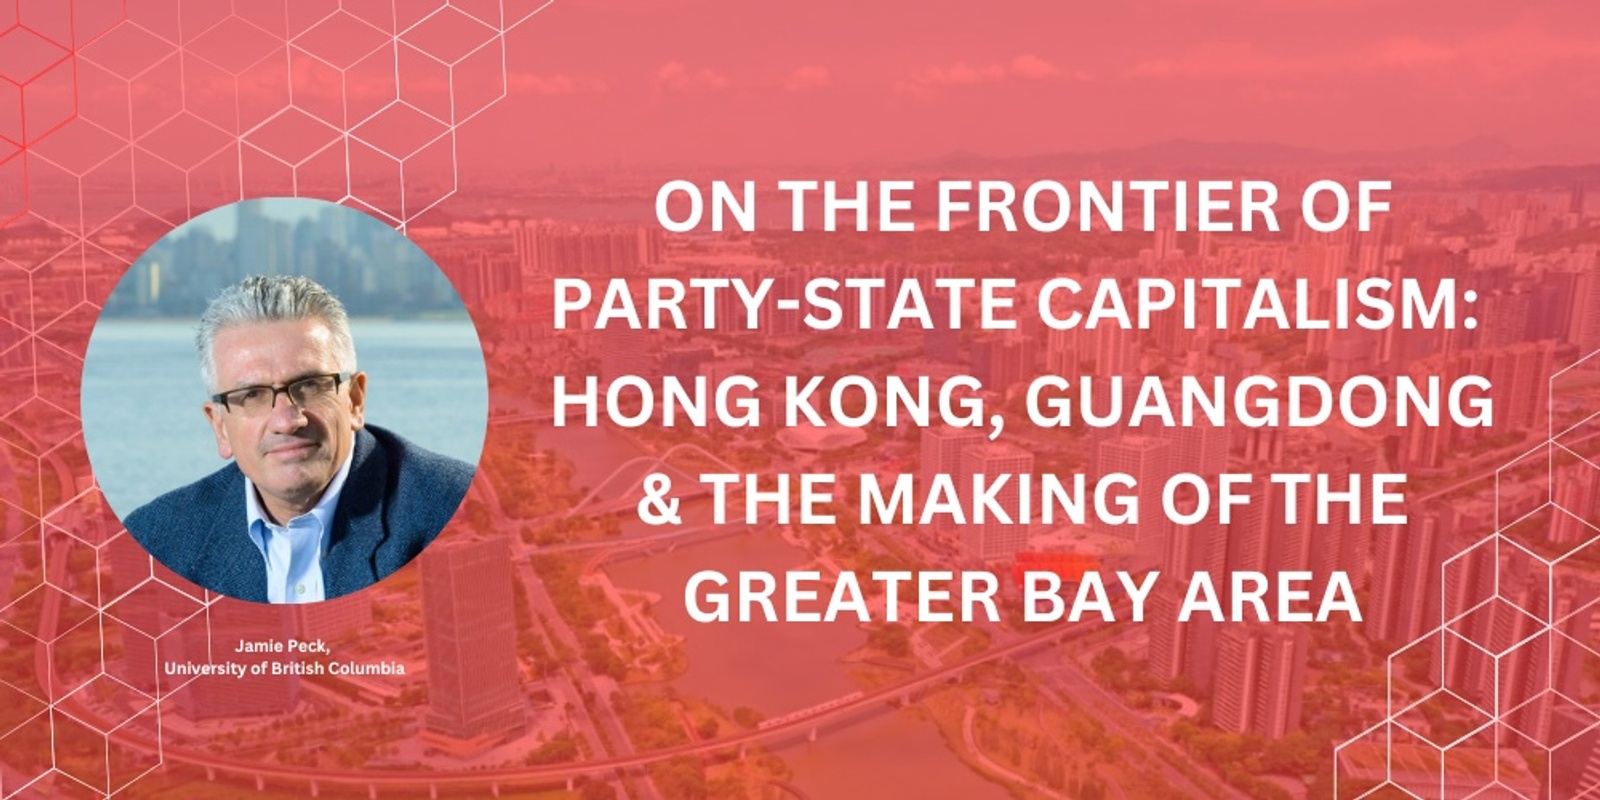 On the frontier of party-state capitalism: Hong Kong, Guangdong & the making of the Greater Bay Area